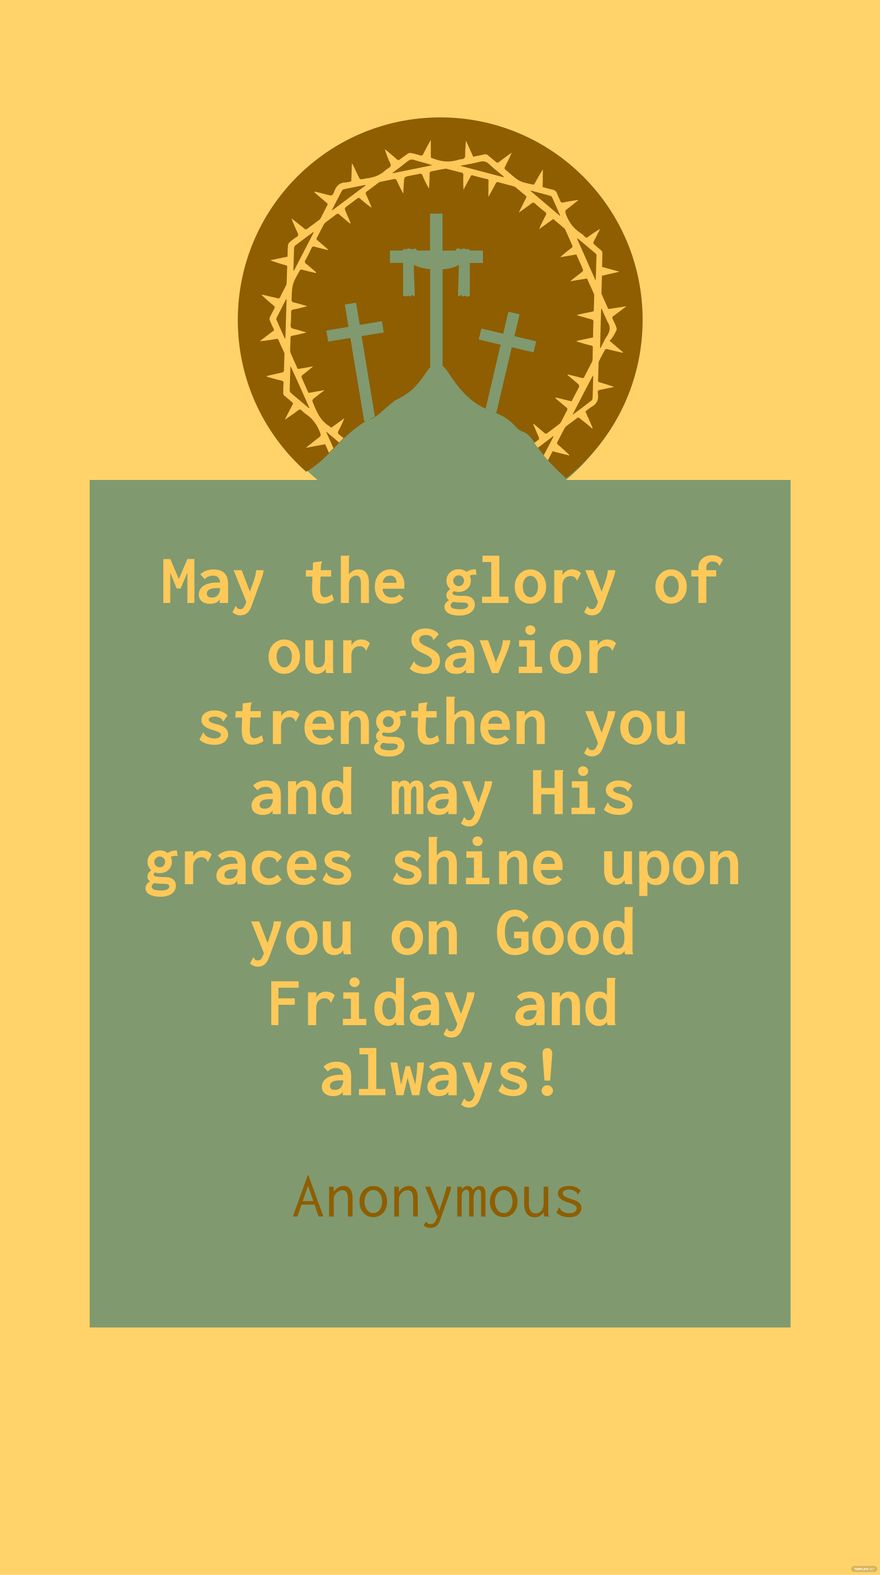 Anonymous - May the glory of our Savior strengthen you and may His graces shine upon you on Good Friday and always!